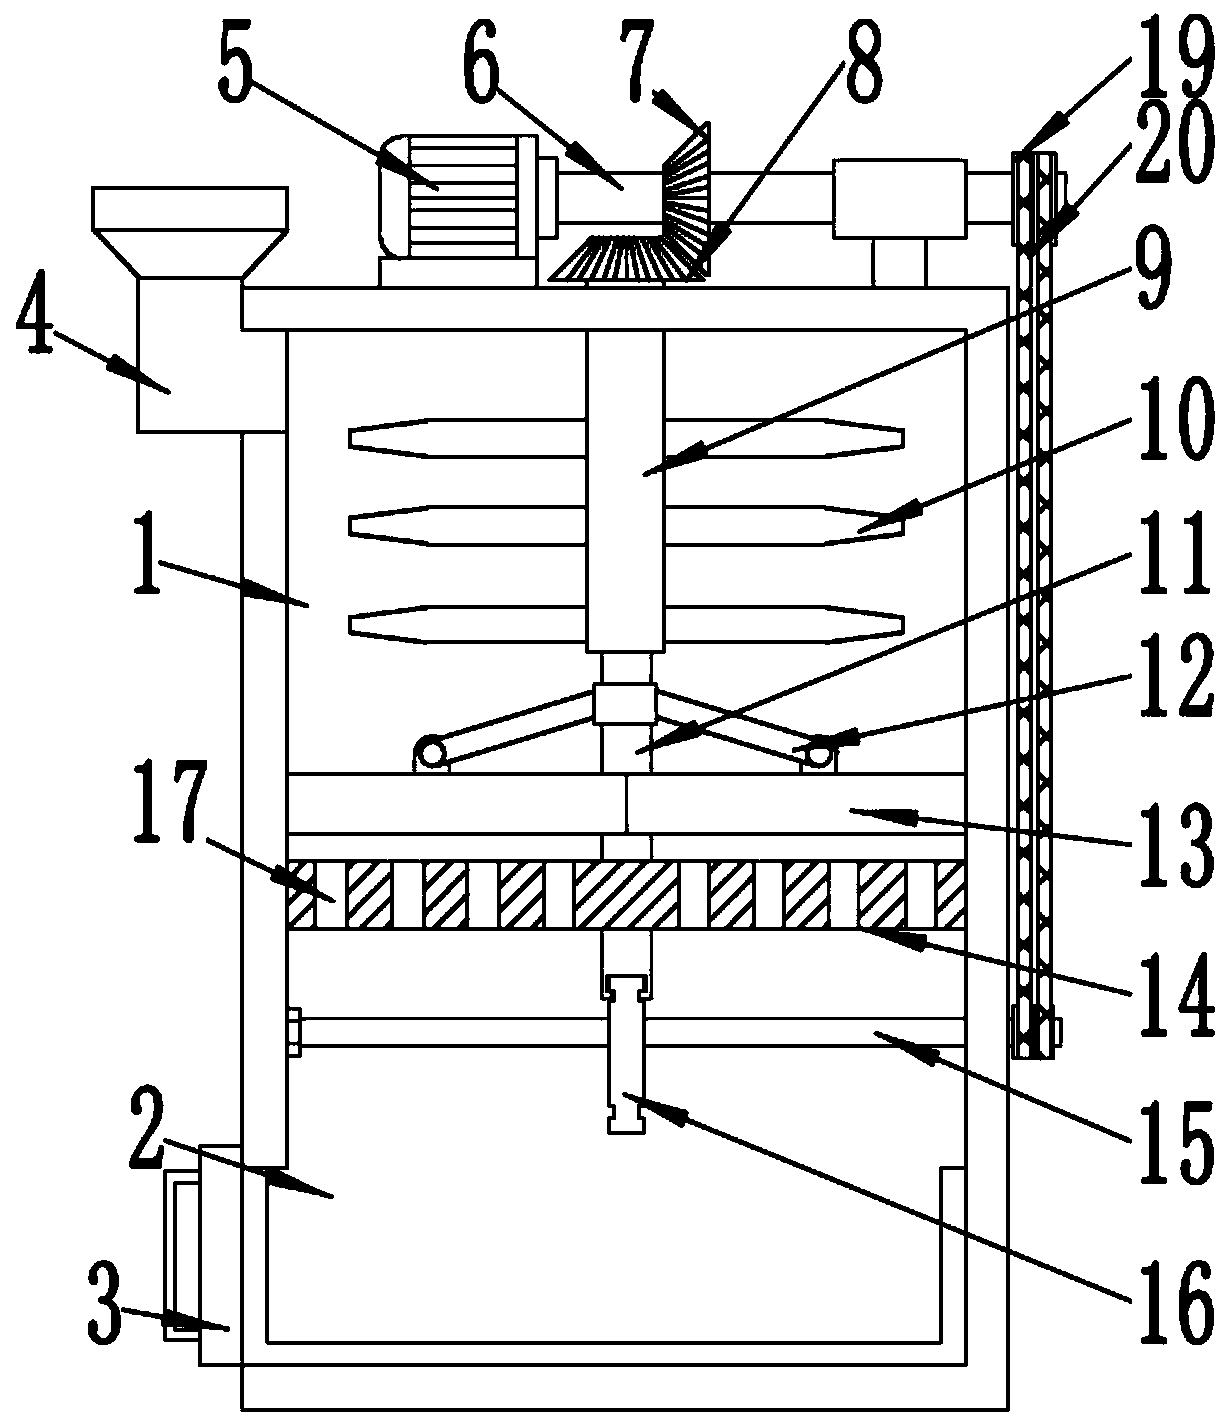 A pelletizing device for feed processing